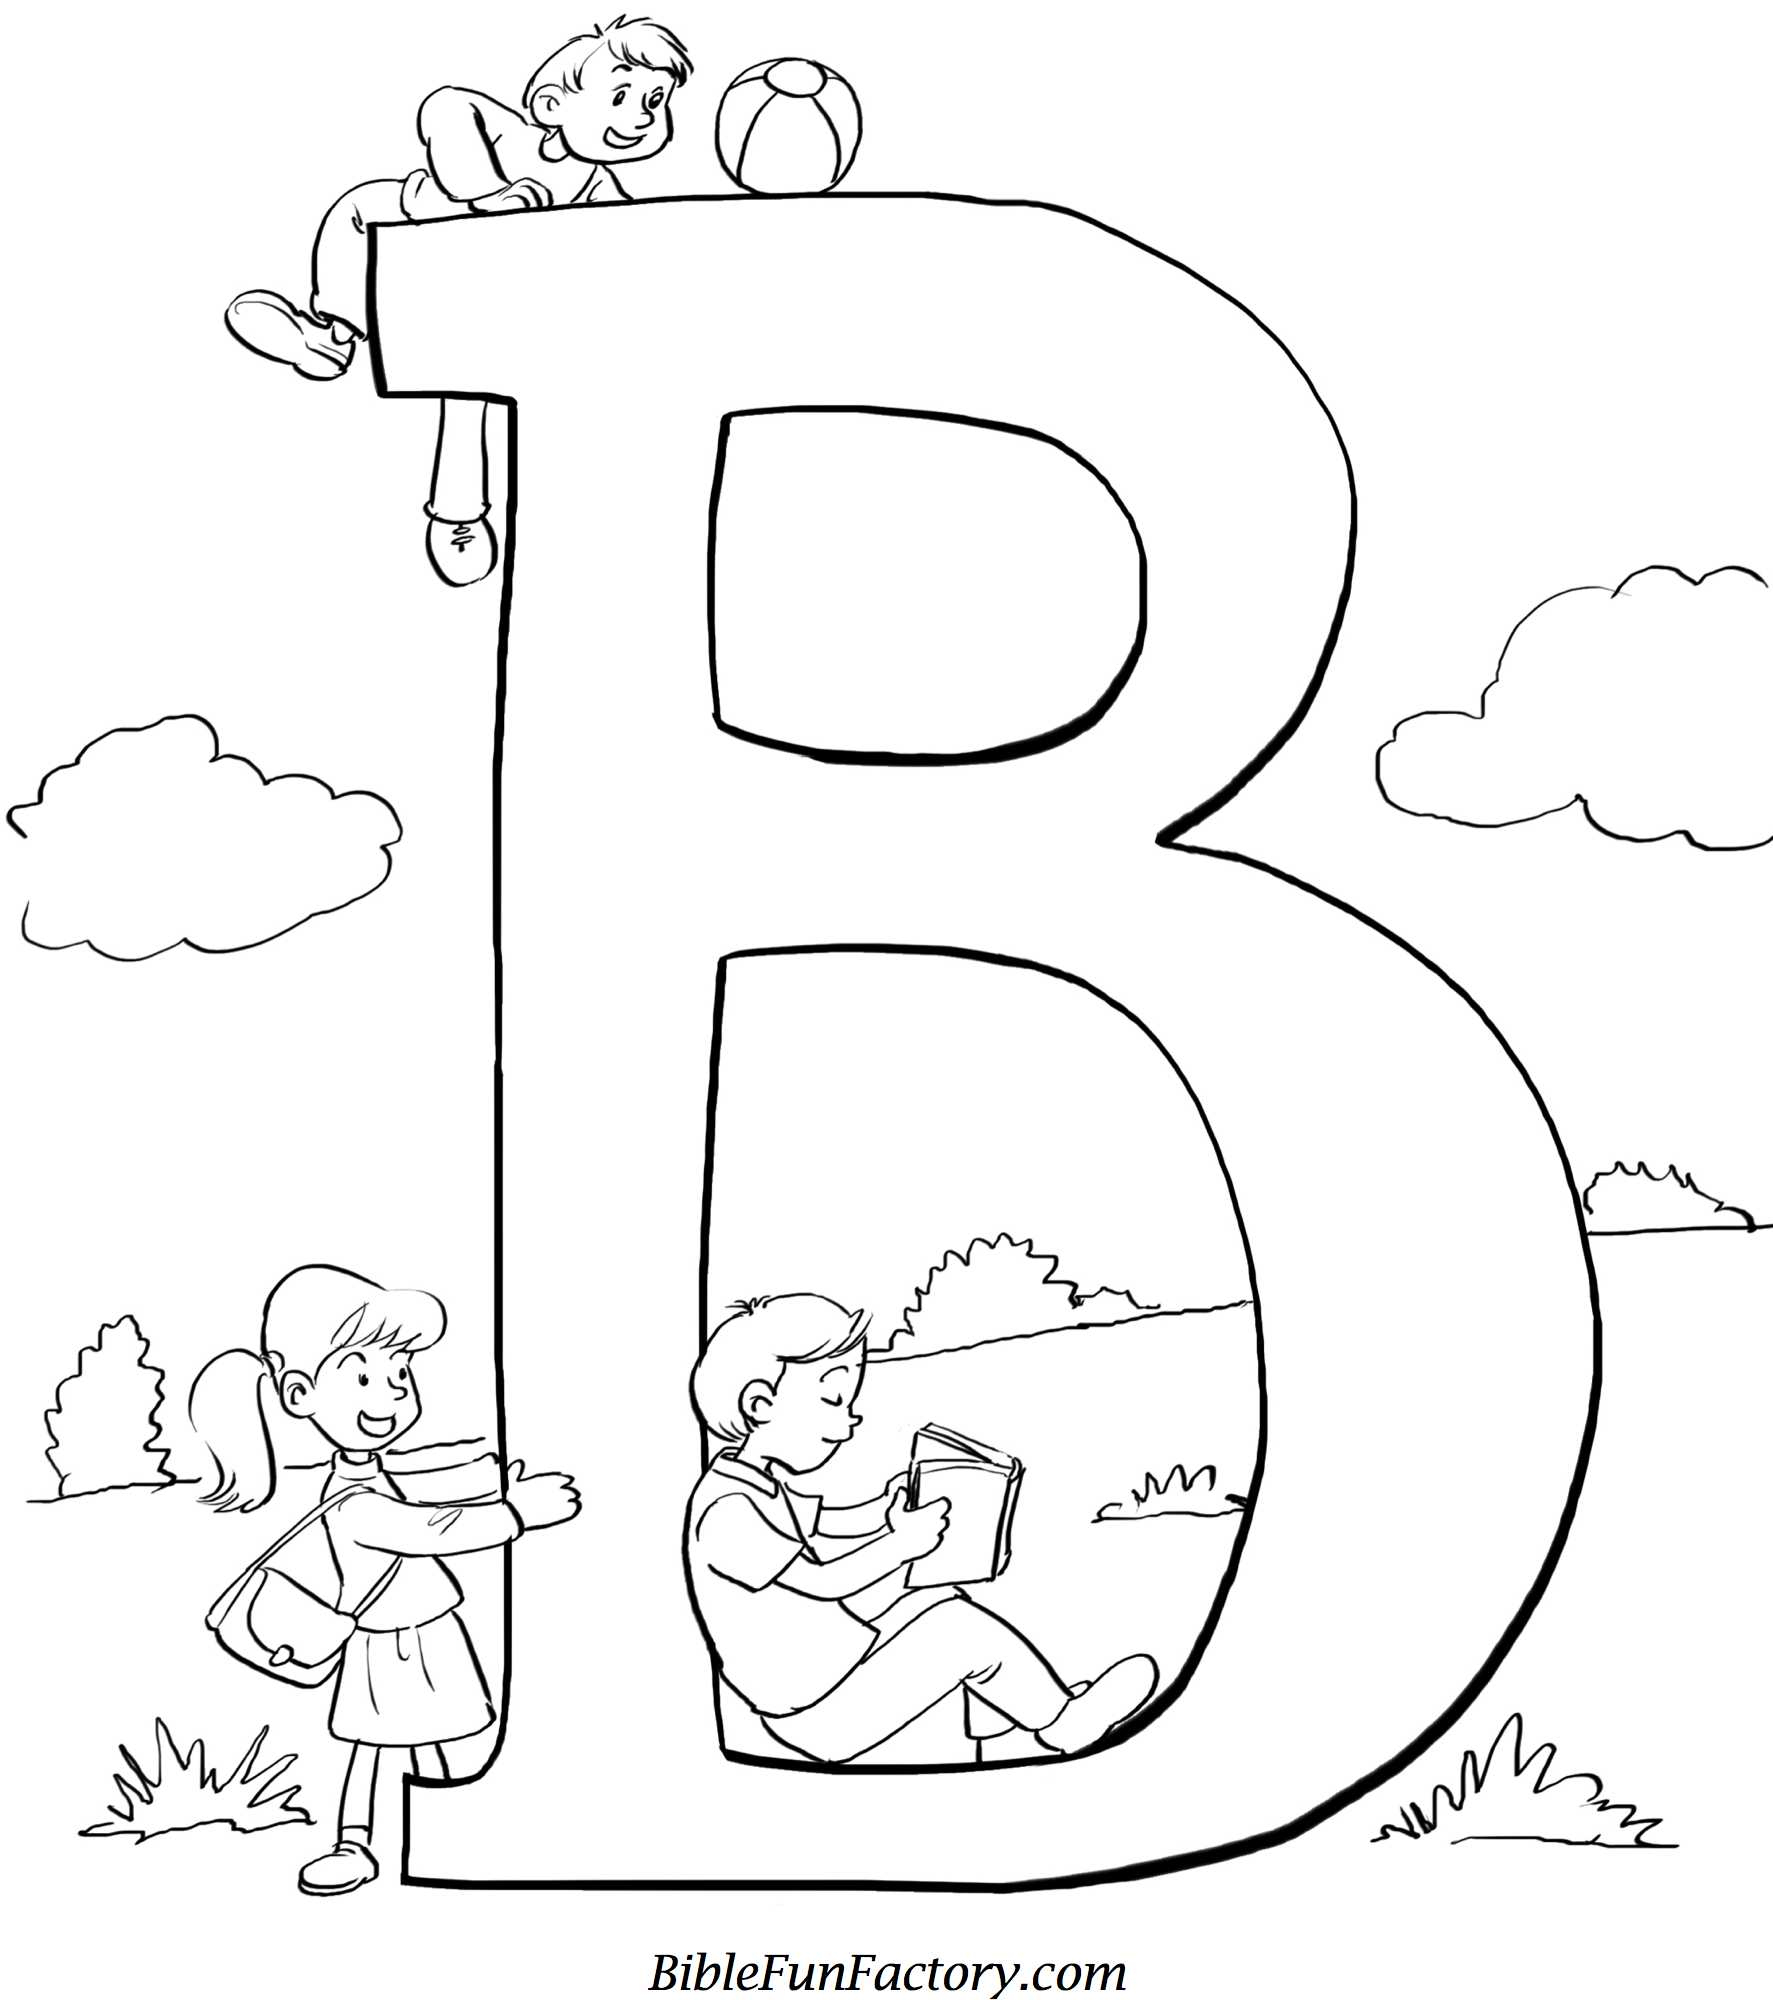 Coloring Pages : Coloring Pages Preschool Sunday School Bible Fors - Free Printable Bible Lessons For Toddlers